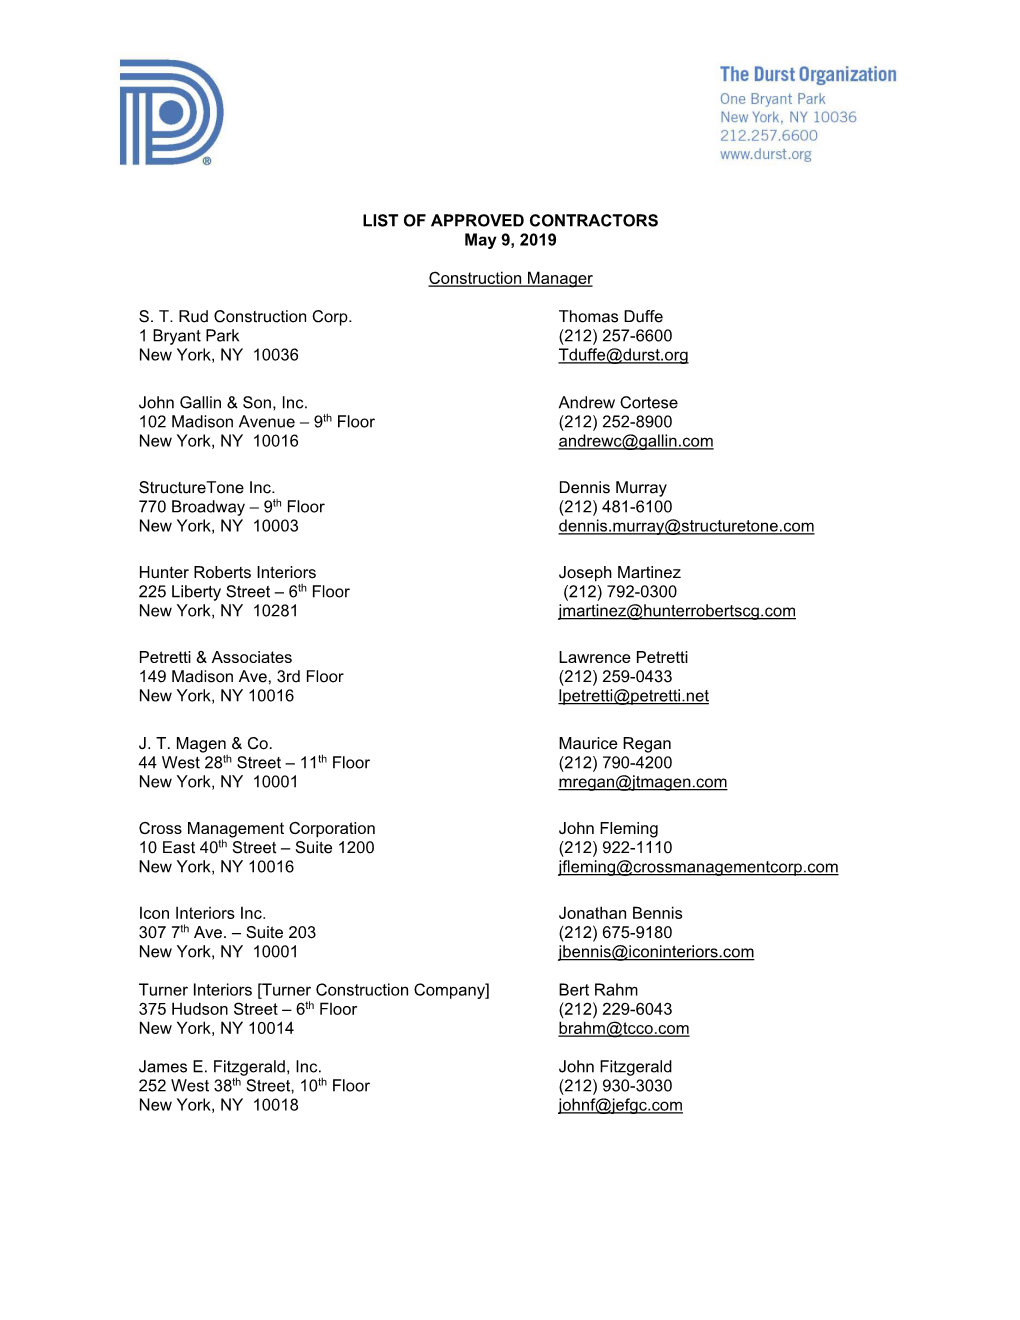 LIST of APPROVED CONTRACTORS May 9, 2019